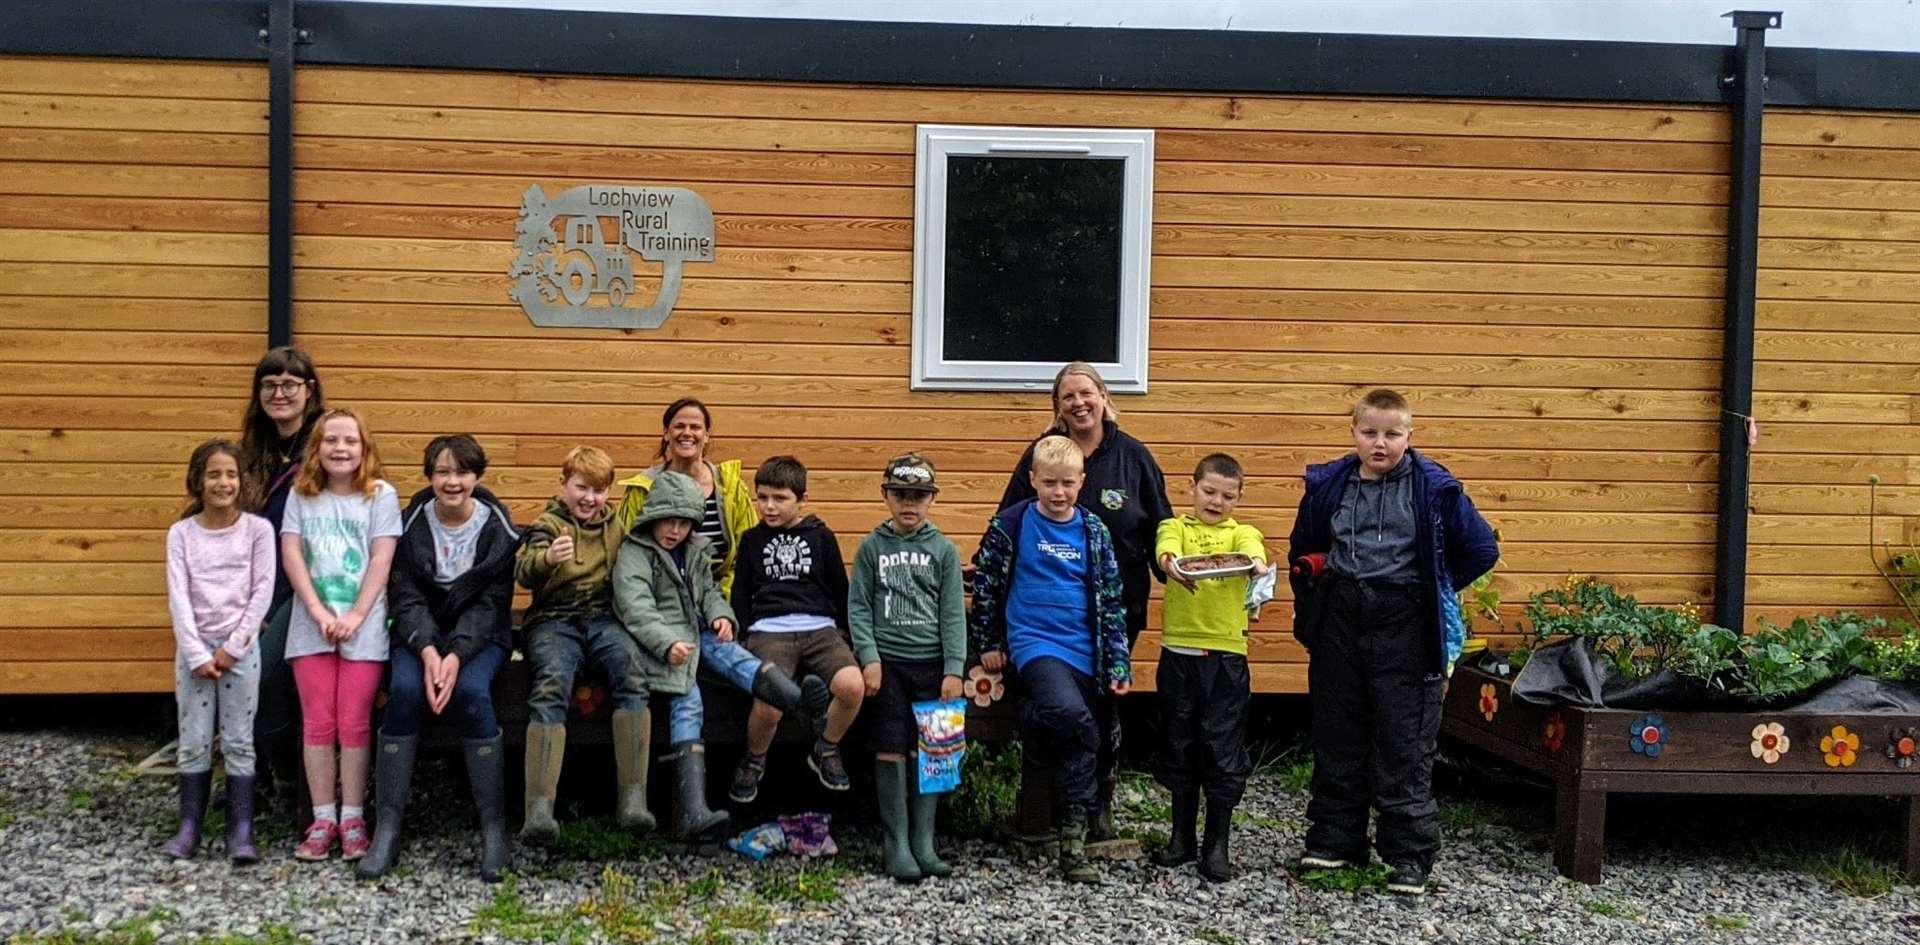 Cara Cameron (back right) with members of the Summer Croft Club at Lochview Rural Training.